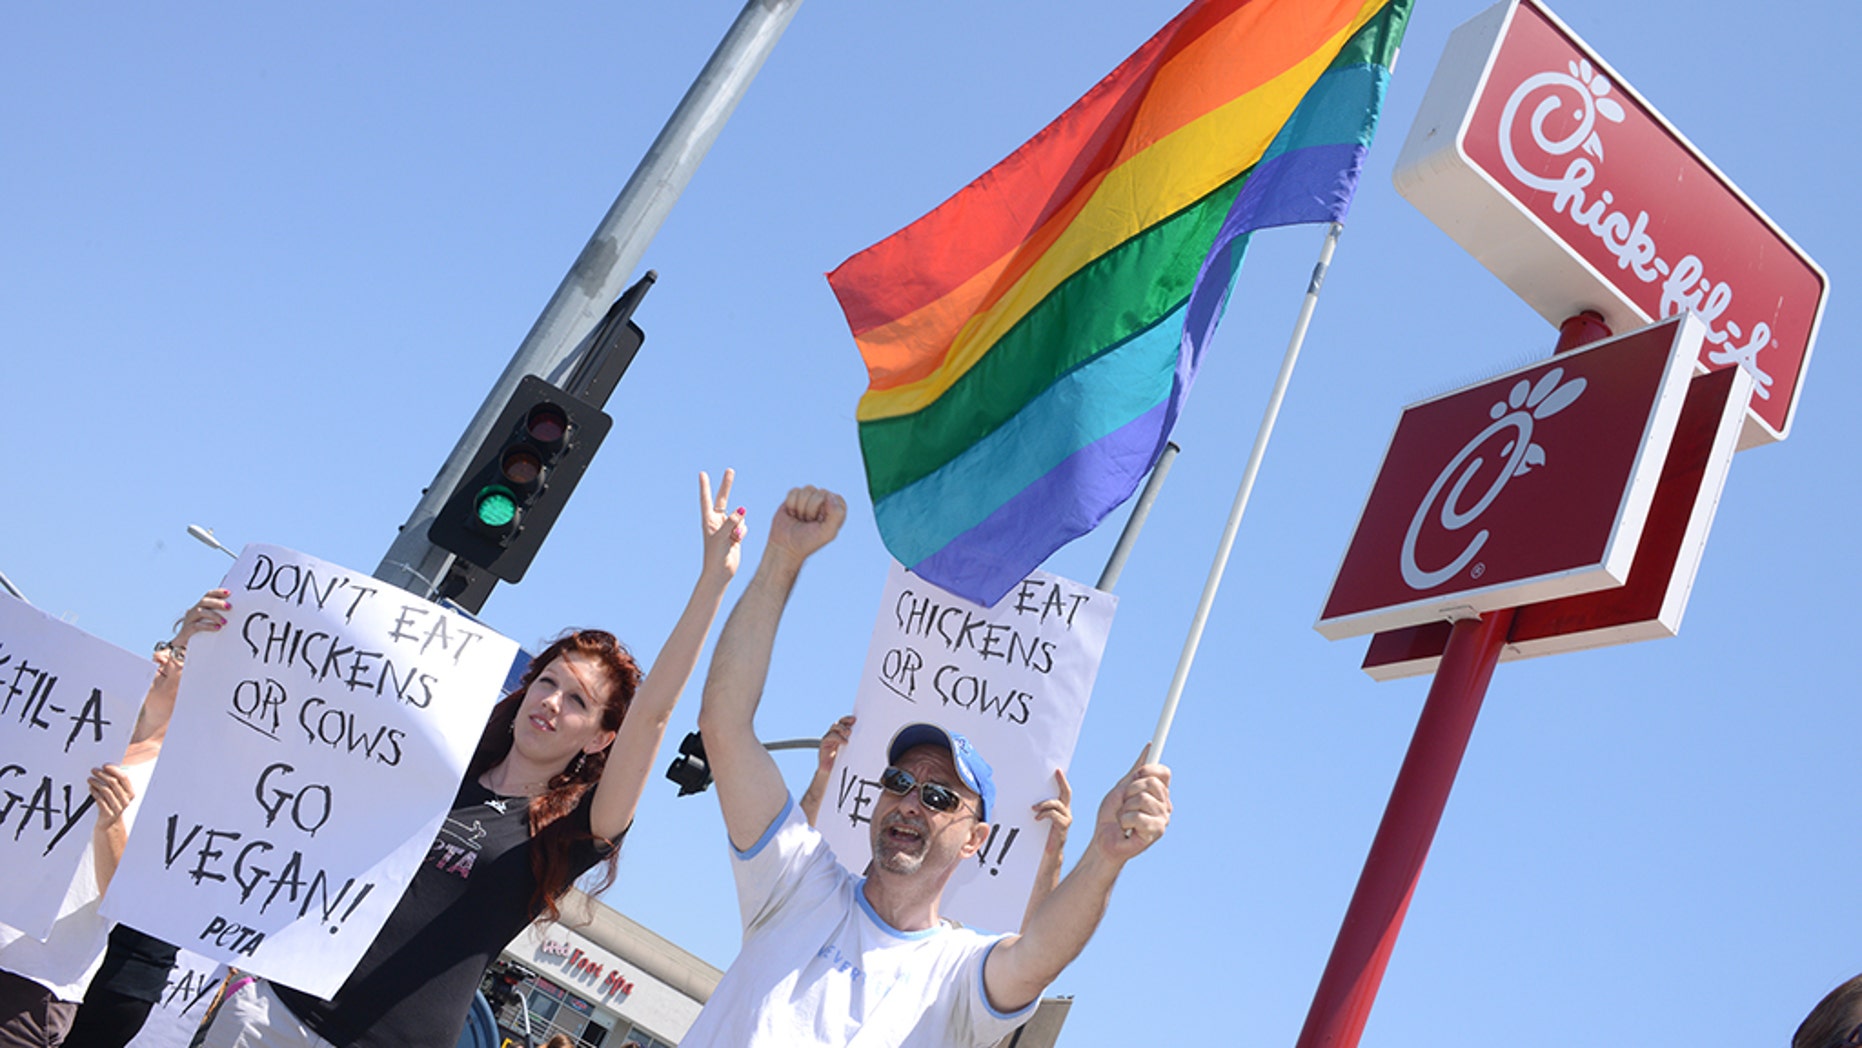 Chick Fil A S Canadian Expansion Sparks Pro Lgbtq Protests Fox News